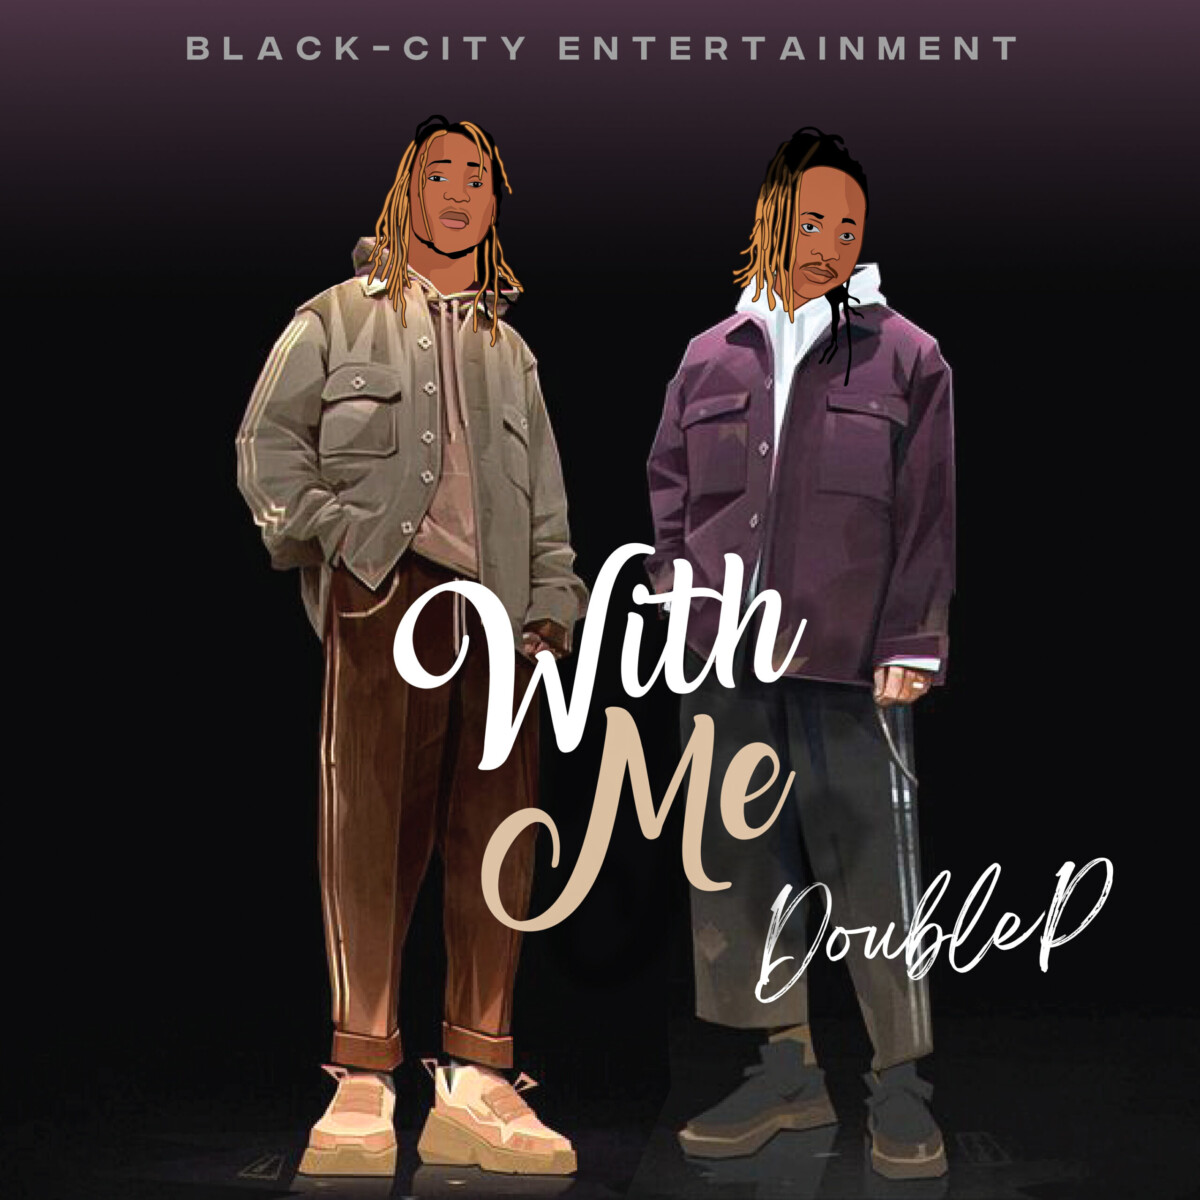 DoubleP – With me